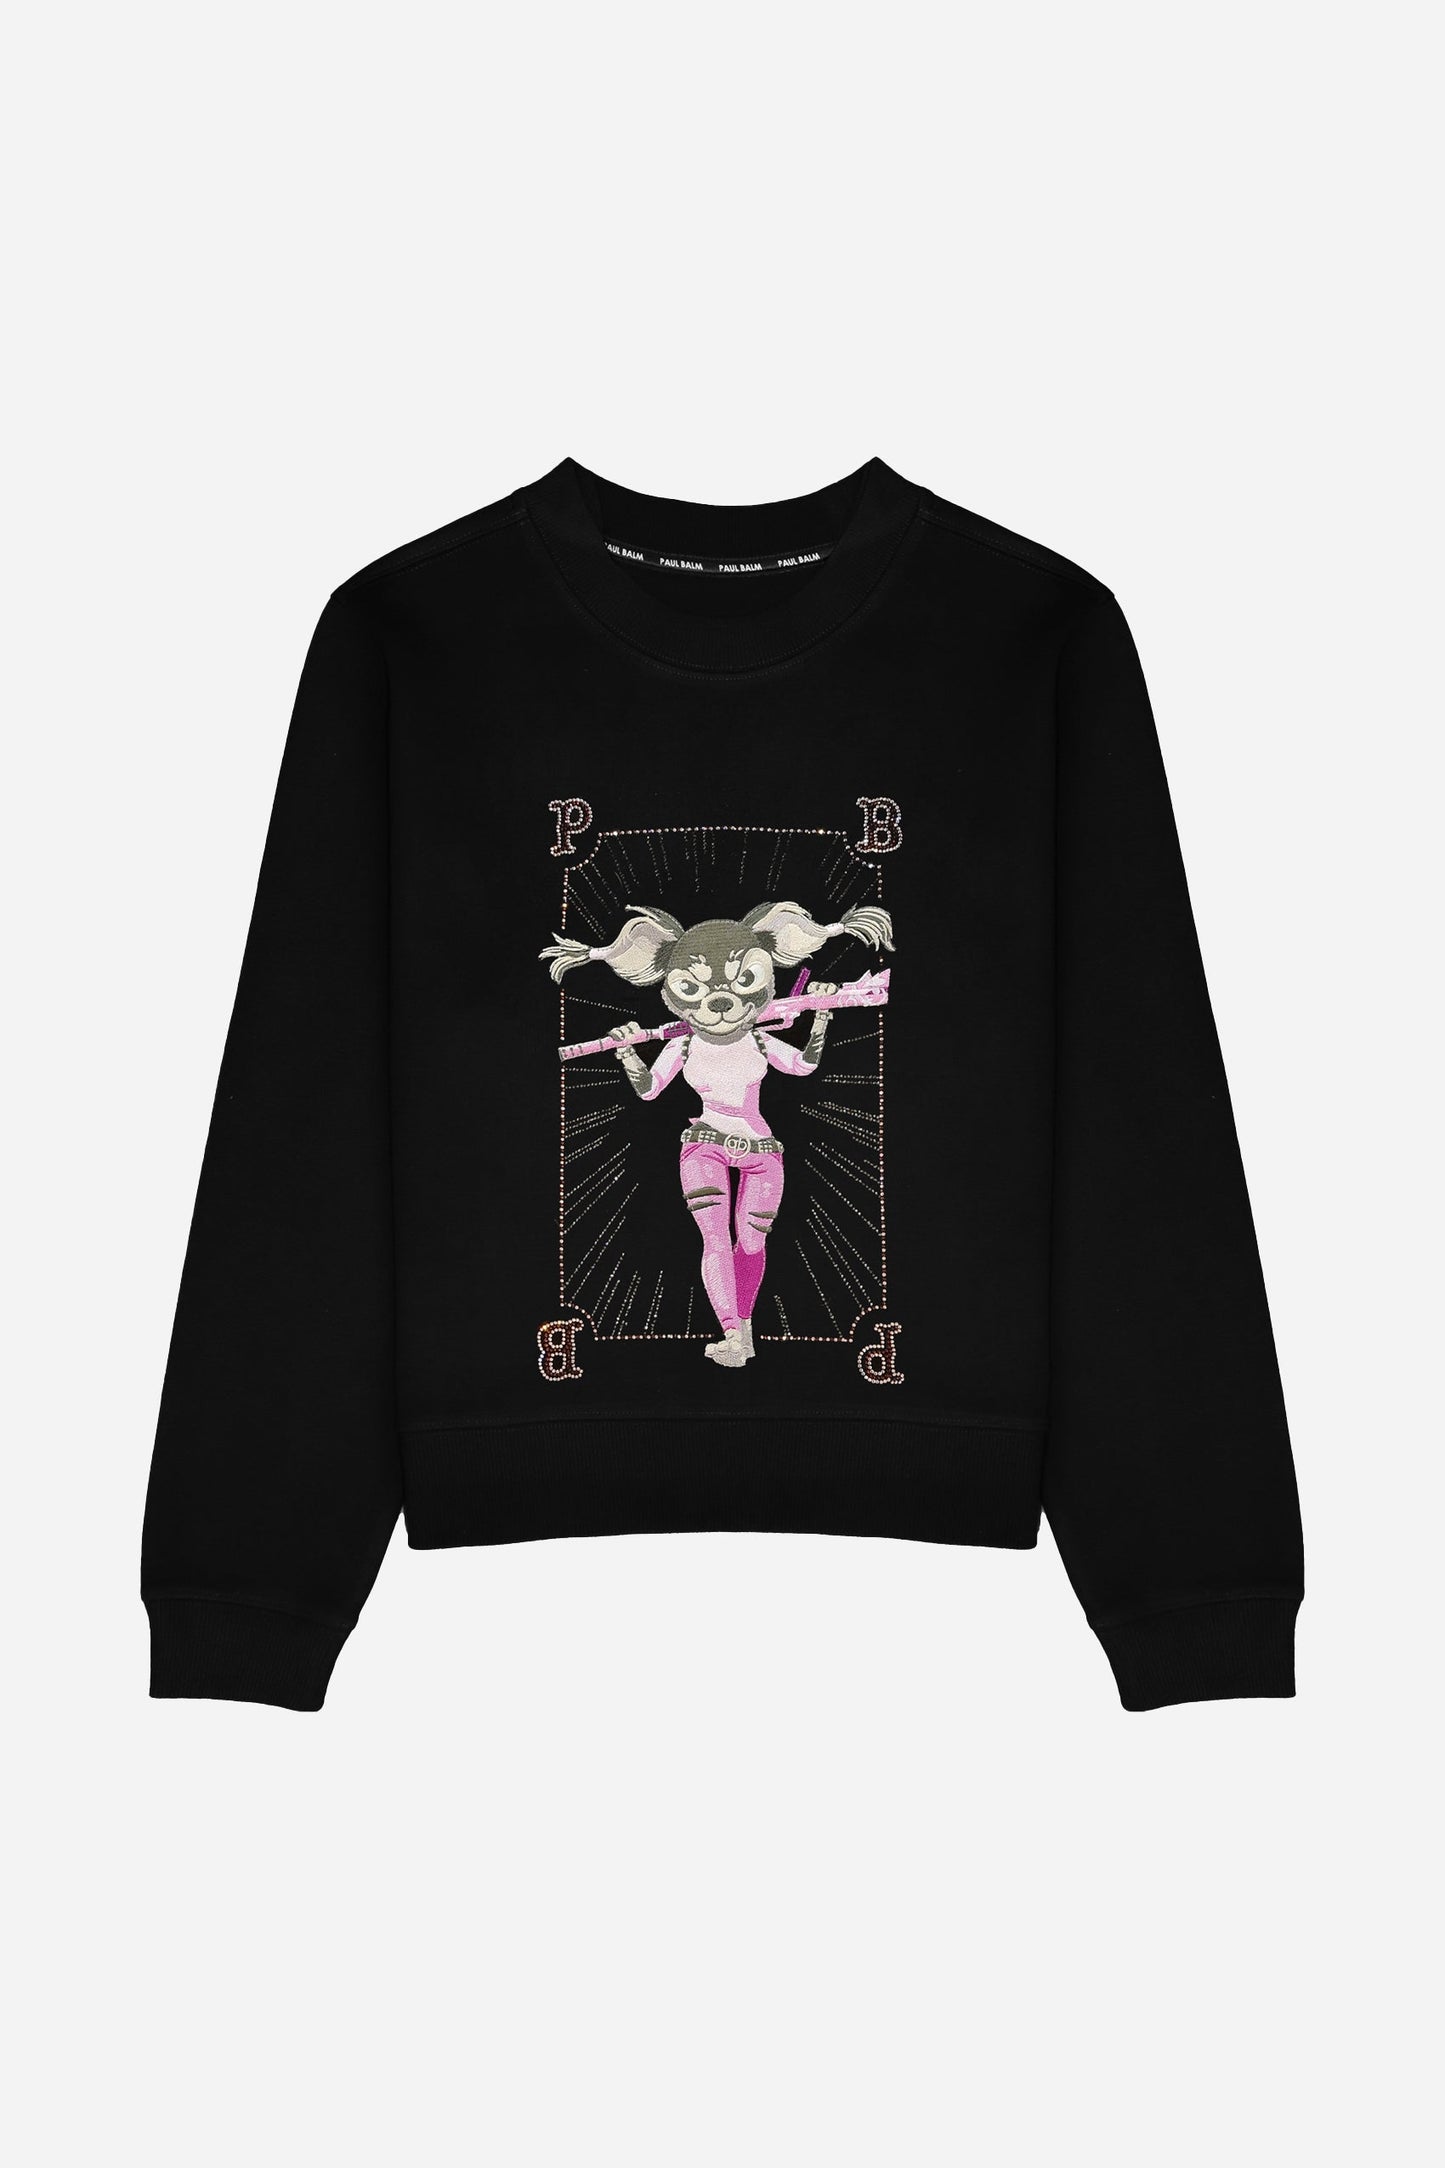 Elly Game Sweatshirt - Limited to 300